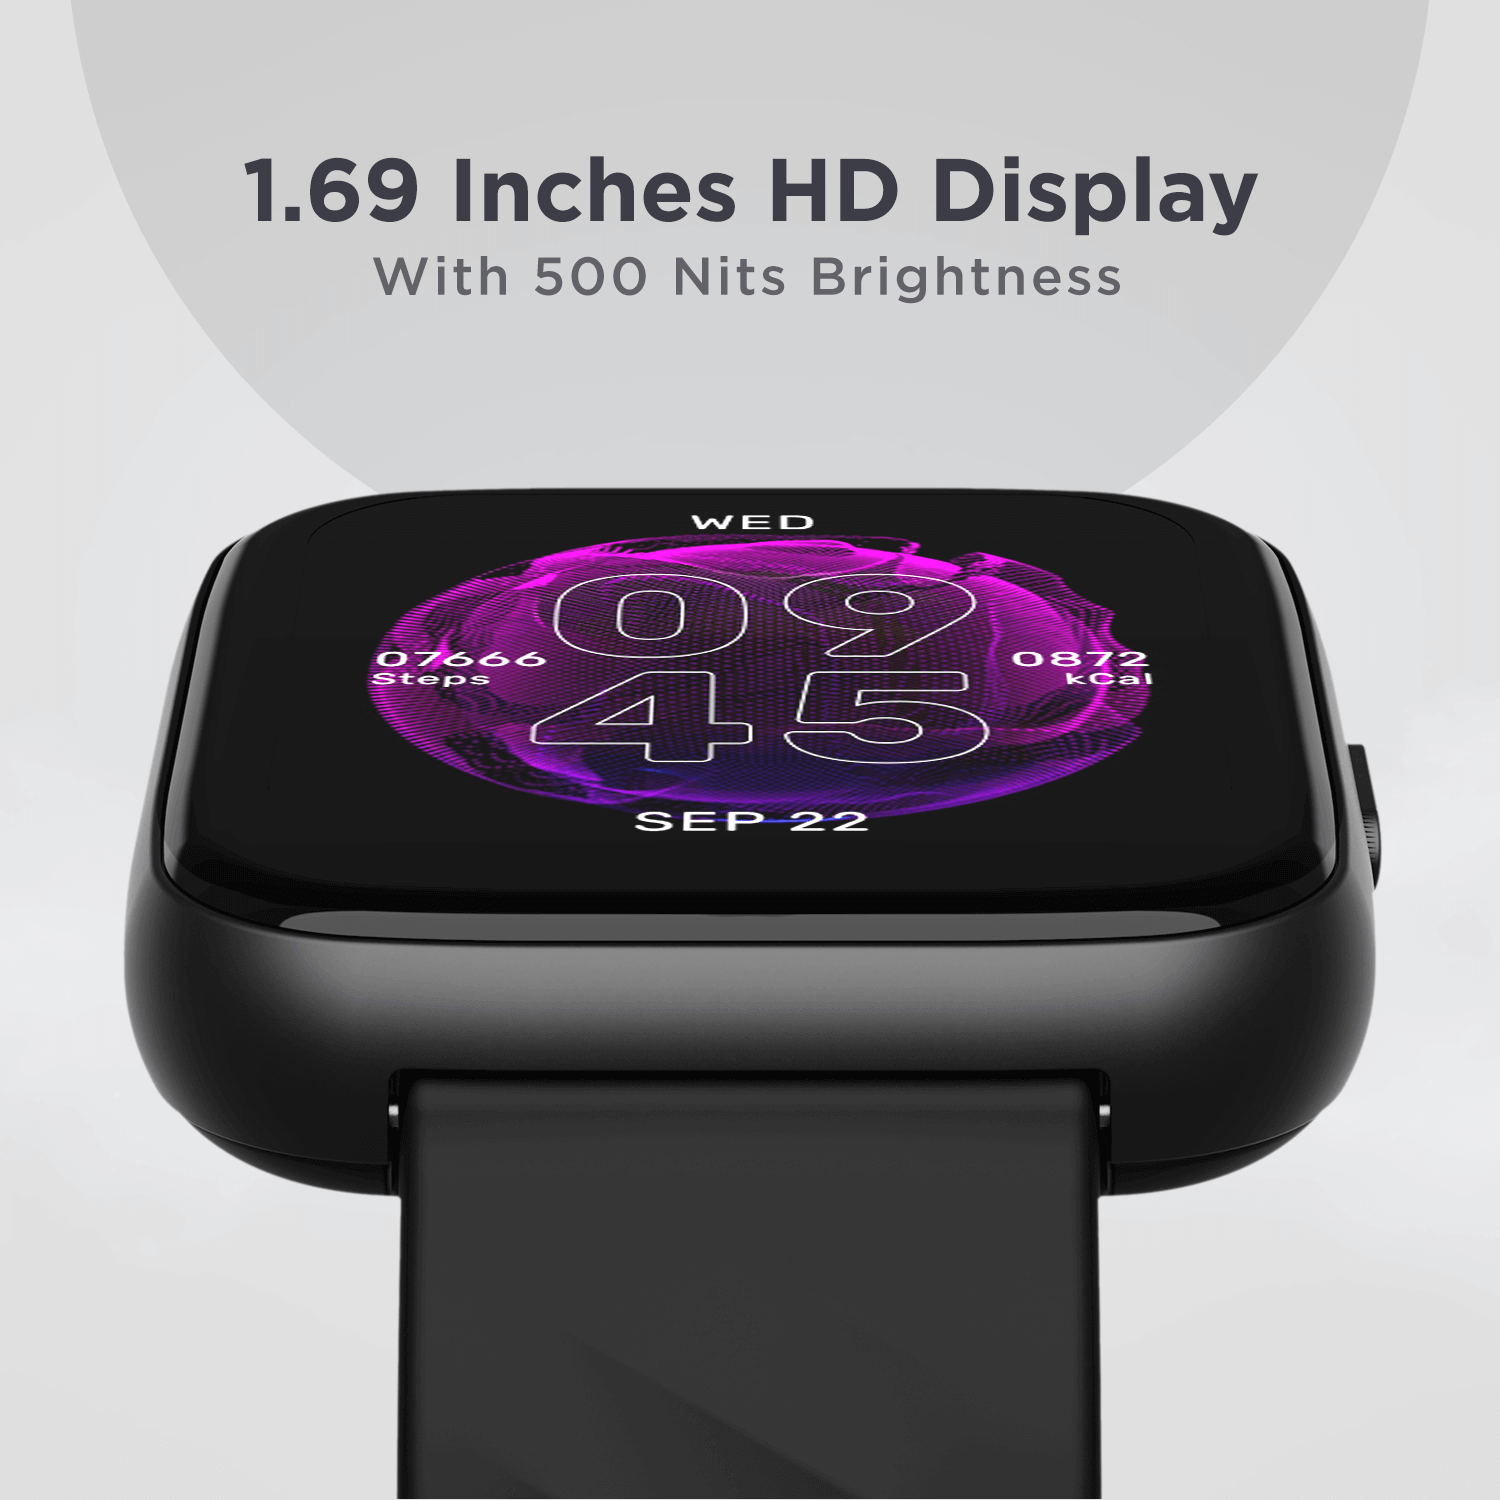 boAt Wave Pro | Smartwatch with 1.69" (4.29 cm) HD Display, Live Cricket Scores, 100+ Watch Faces, Control Your Music & Camera